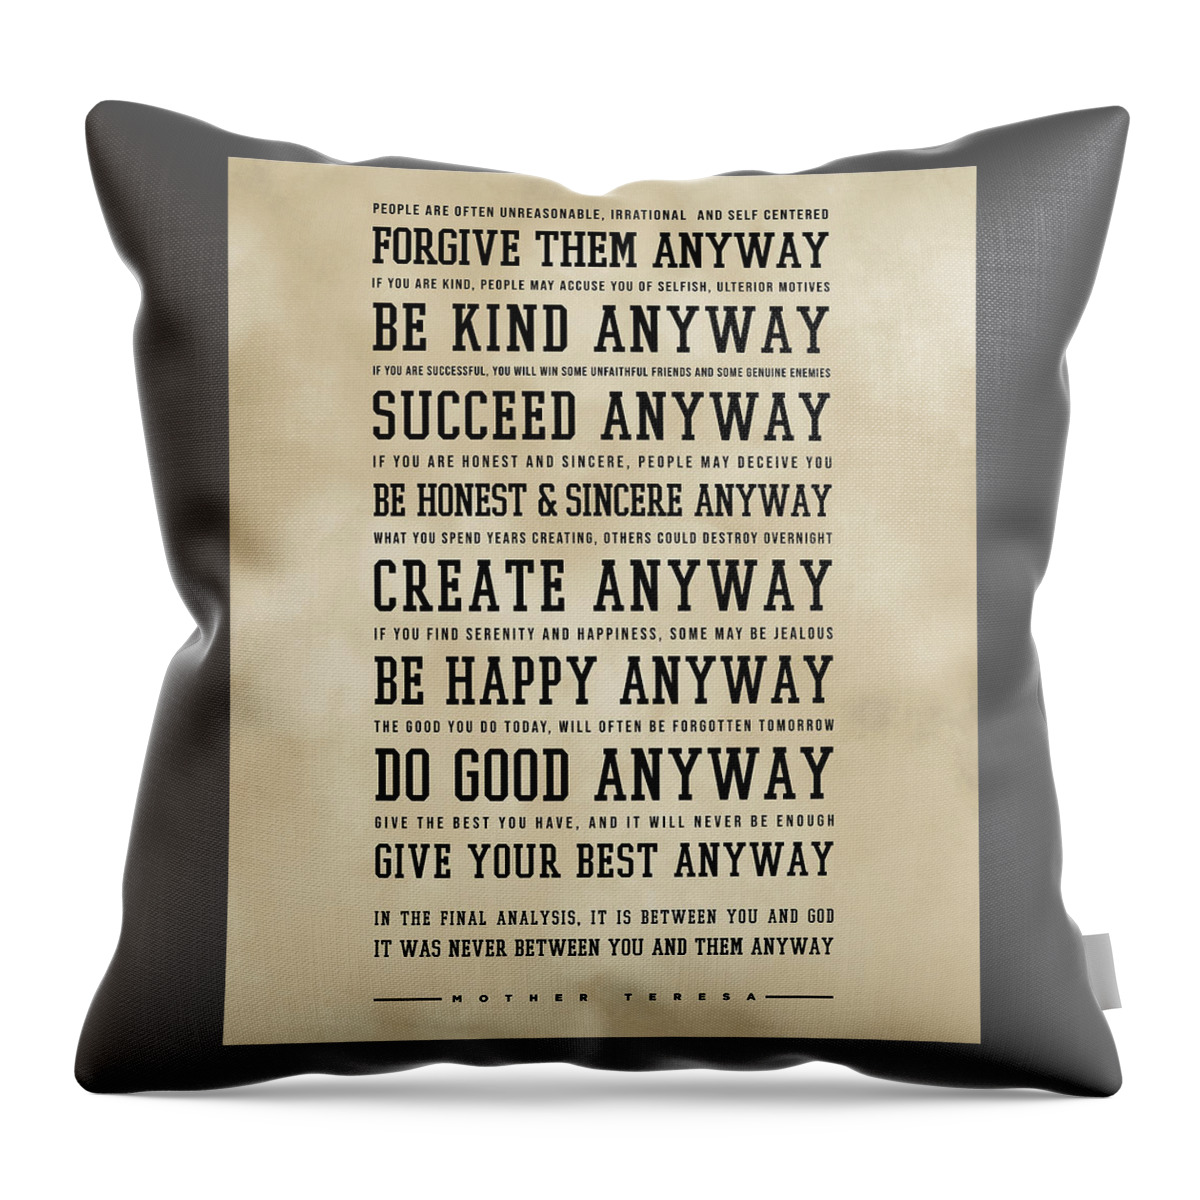 Do It Anyway Throw Pillow featuring the digital art Do It Anyway - Mother Teresa Poem - Literature - Typewriter Print 3 - Vintage by Studio Grafiikka